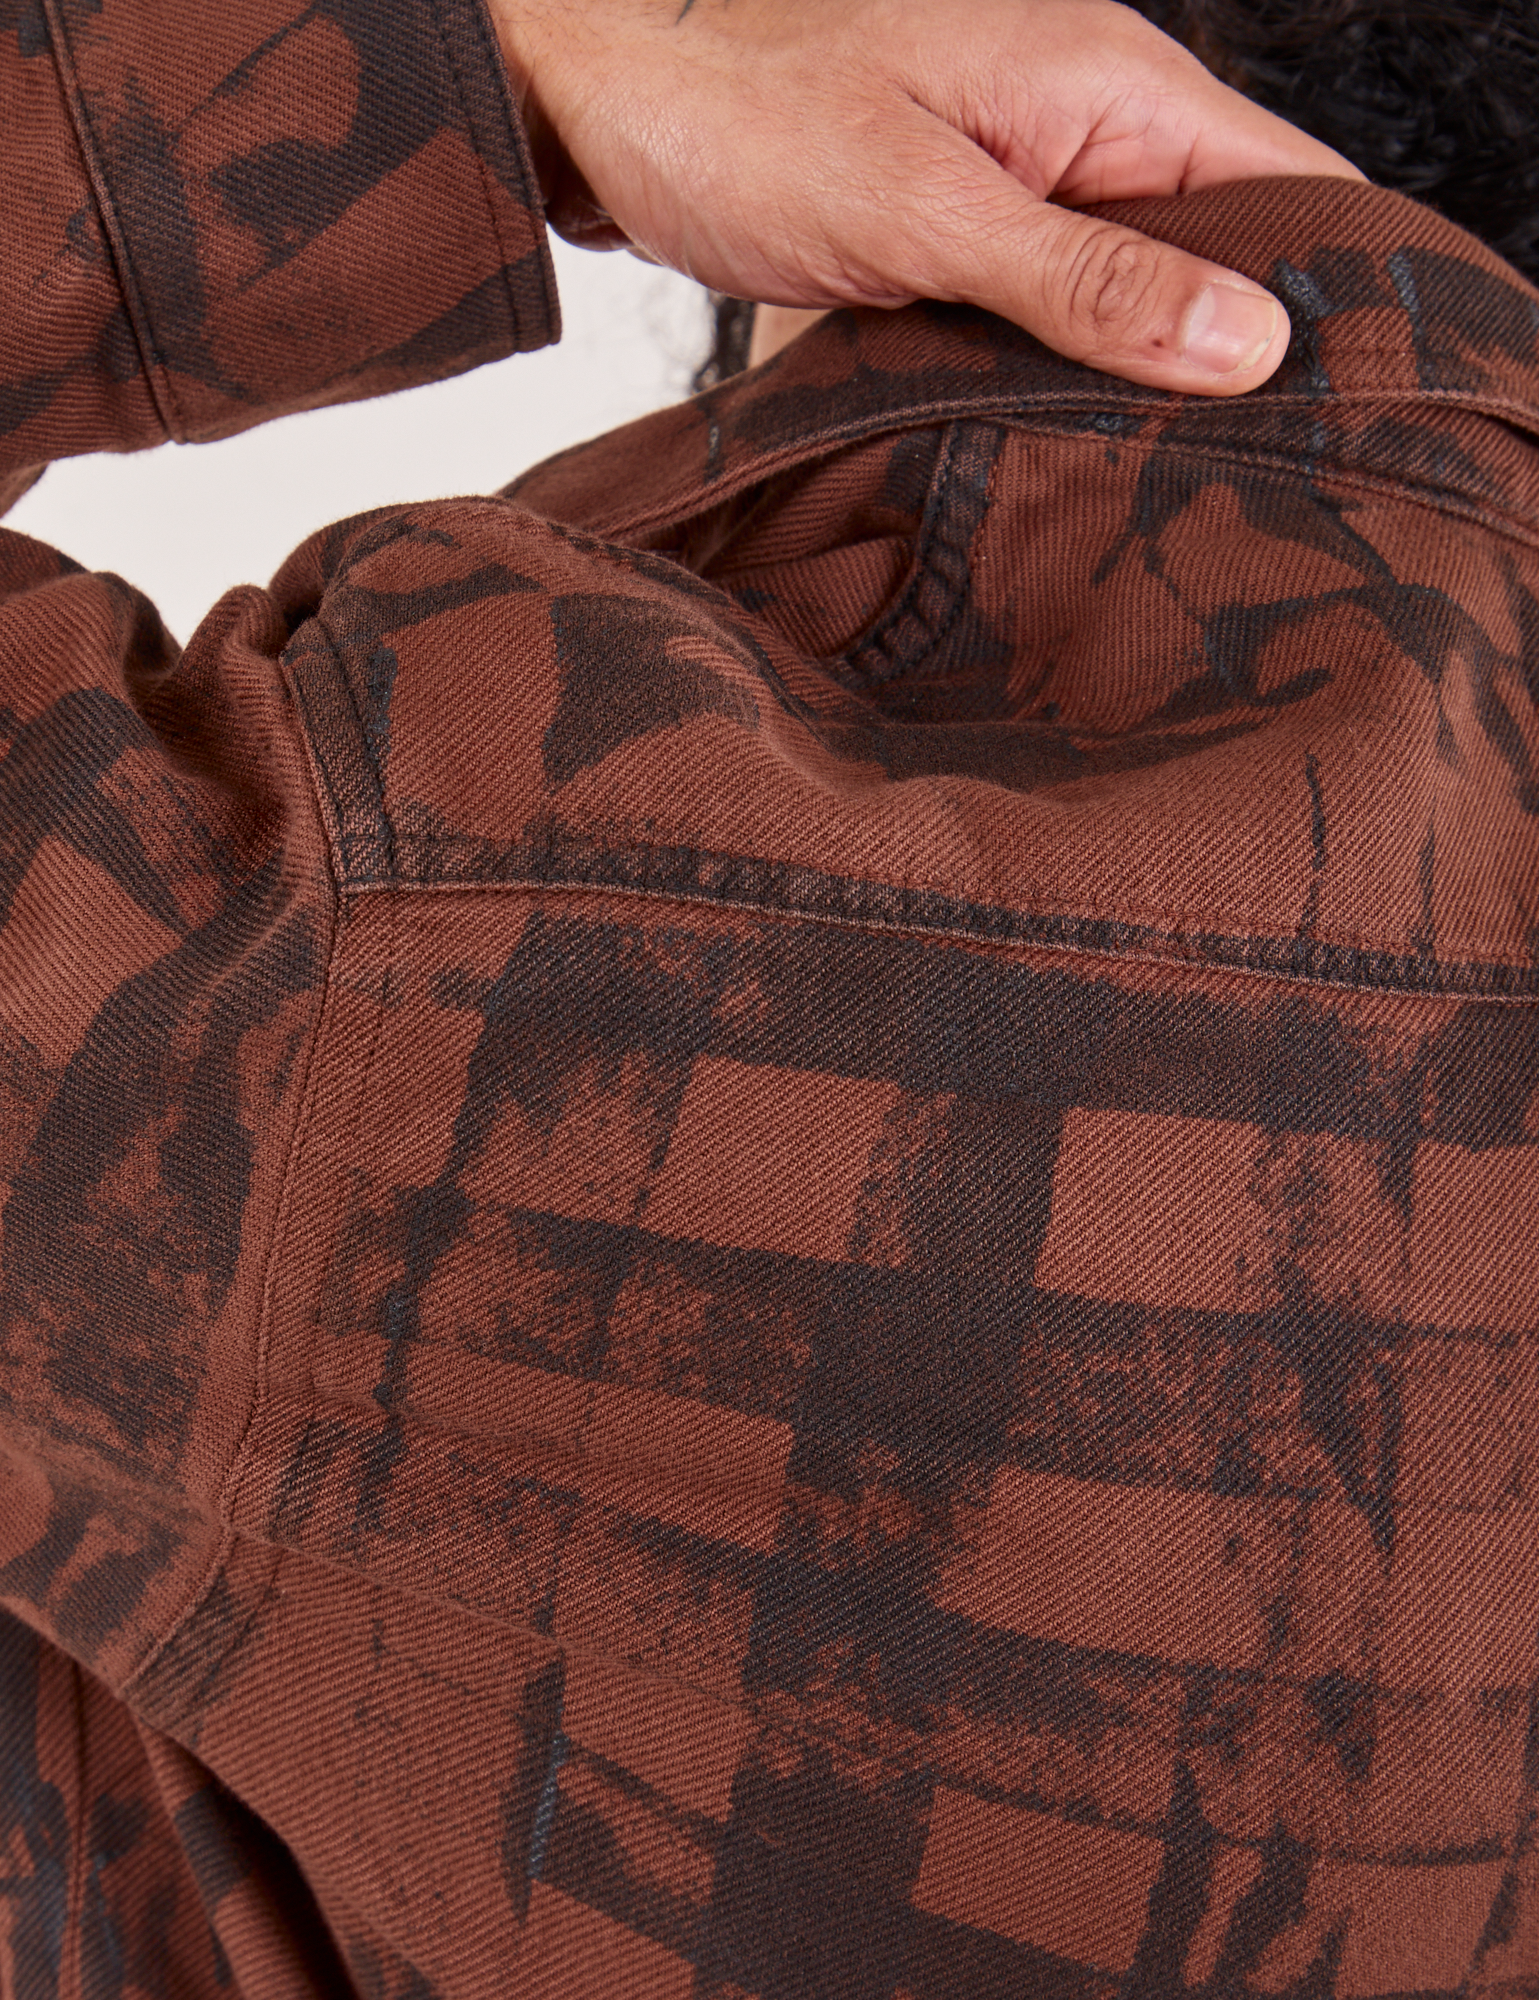 Plaid Flannel Overshirt in Fudgesicle Brown back shoulder close up on Jesse